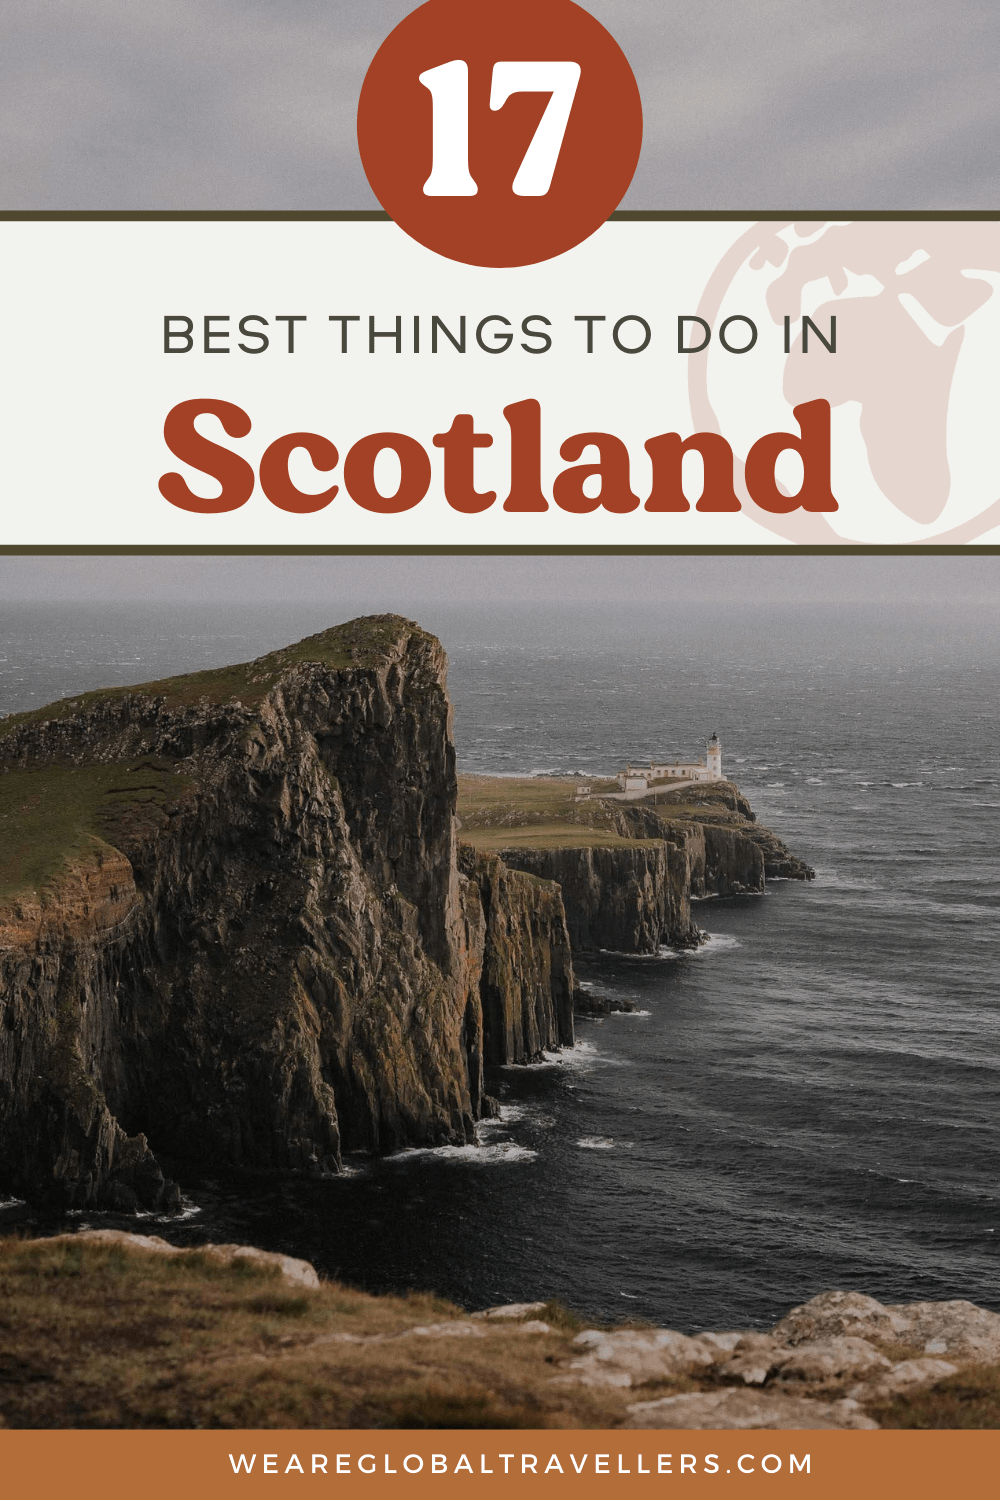 The best things to do in Scotland